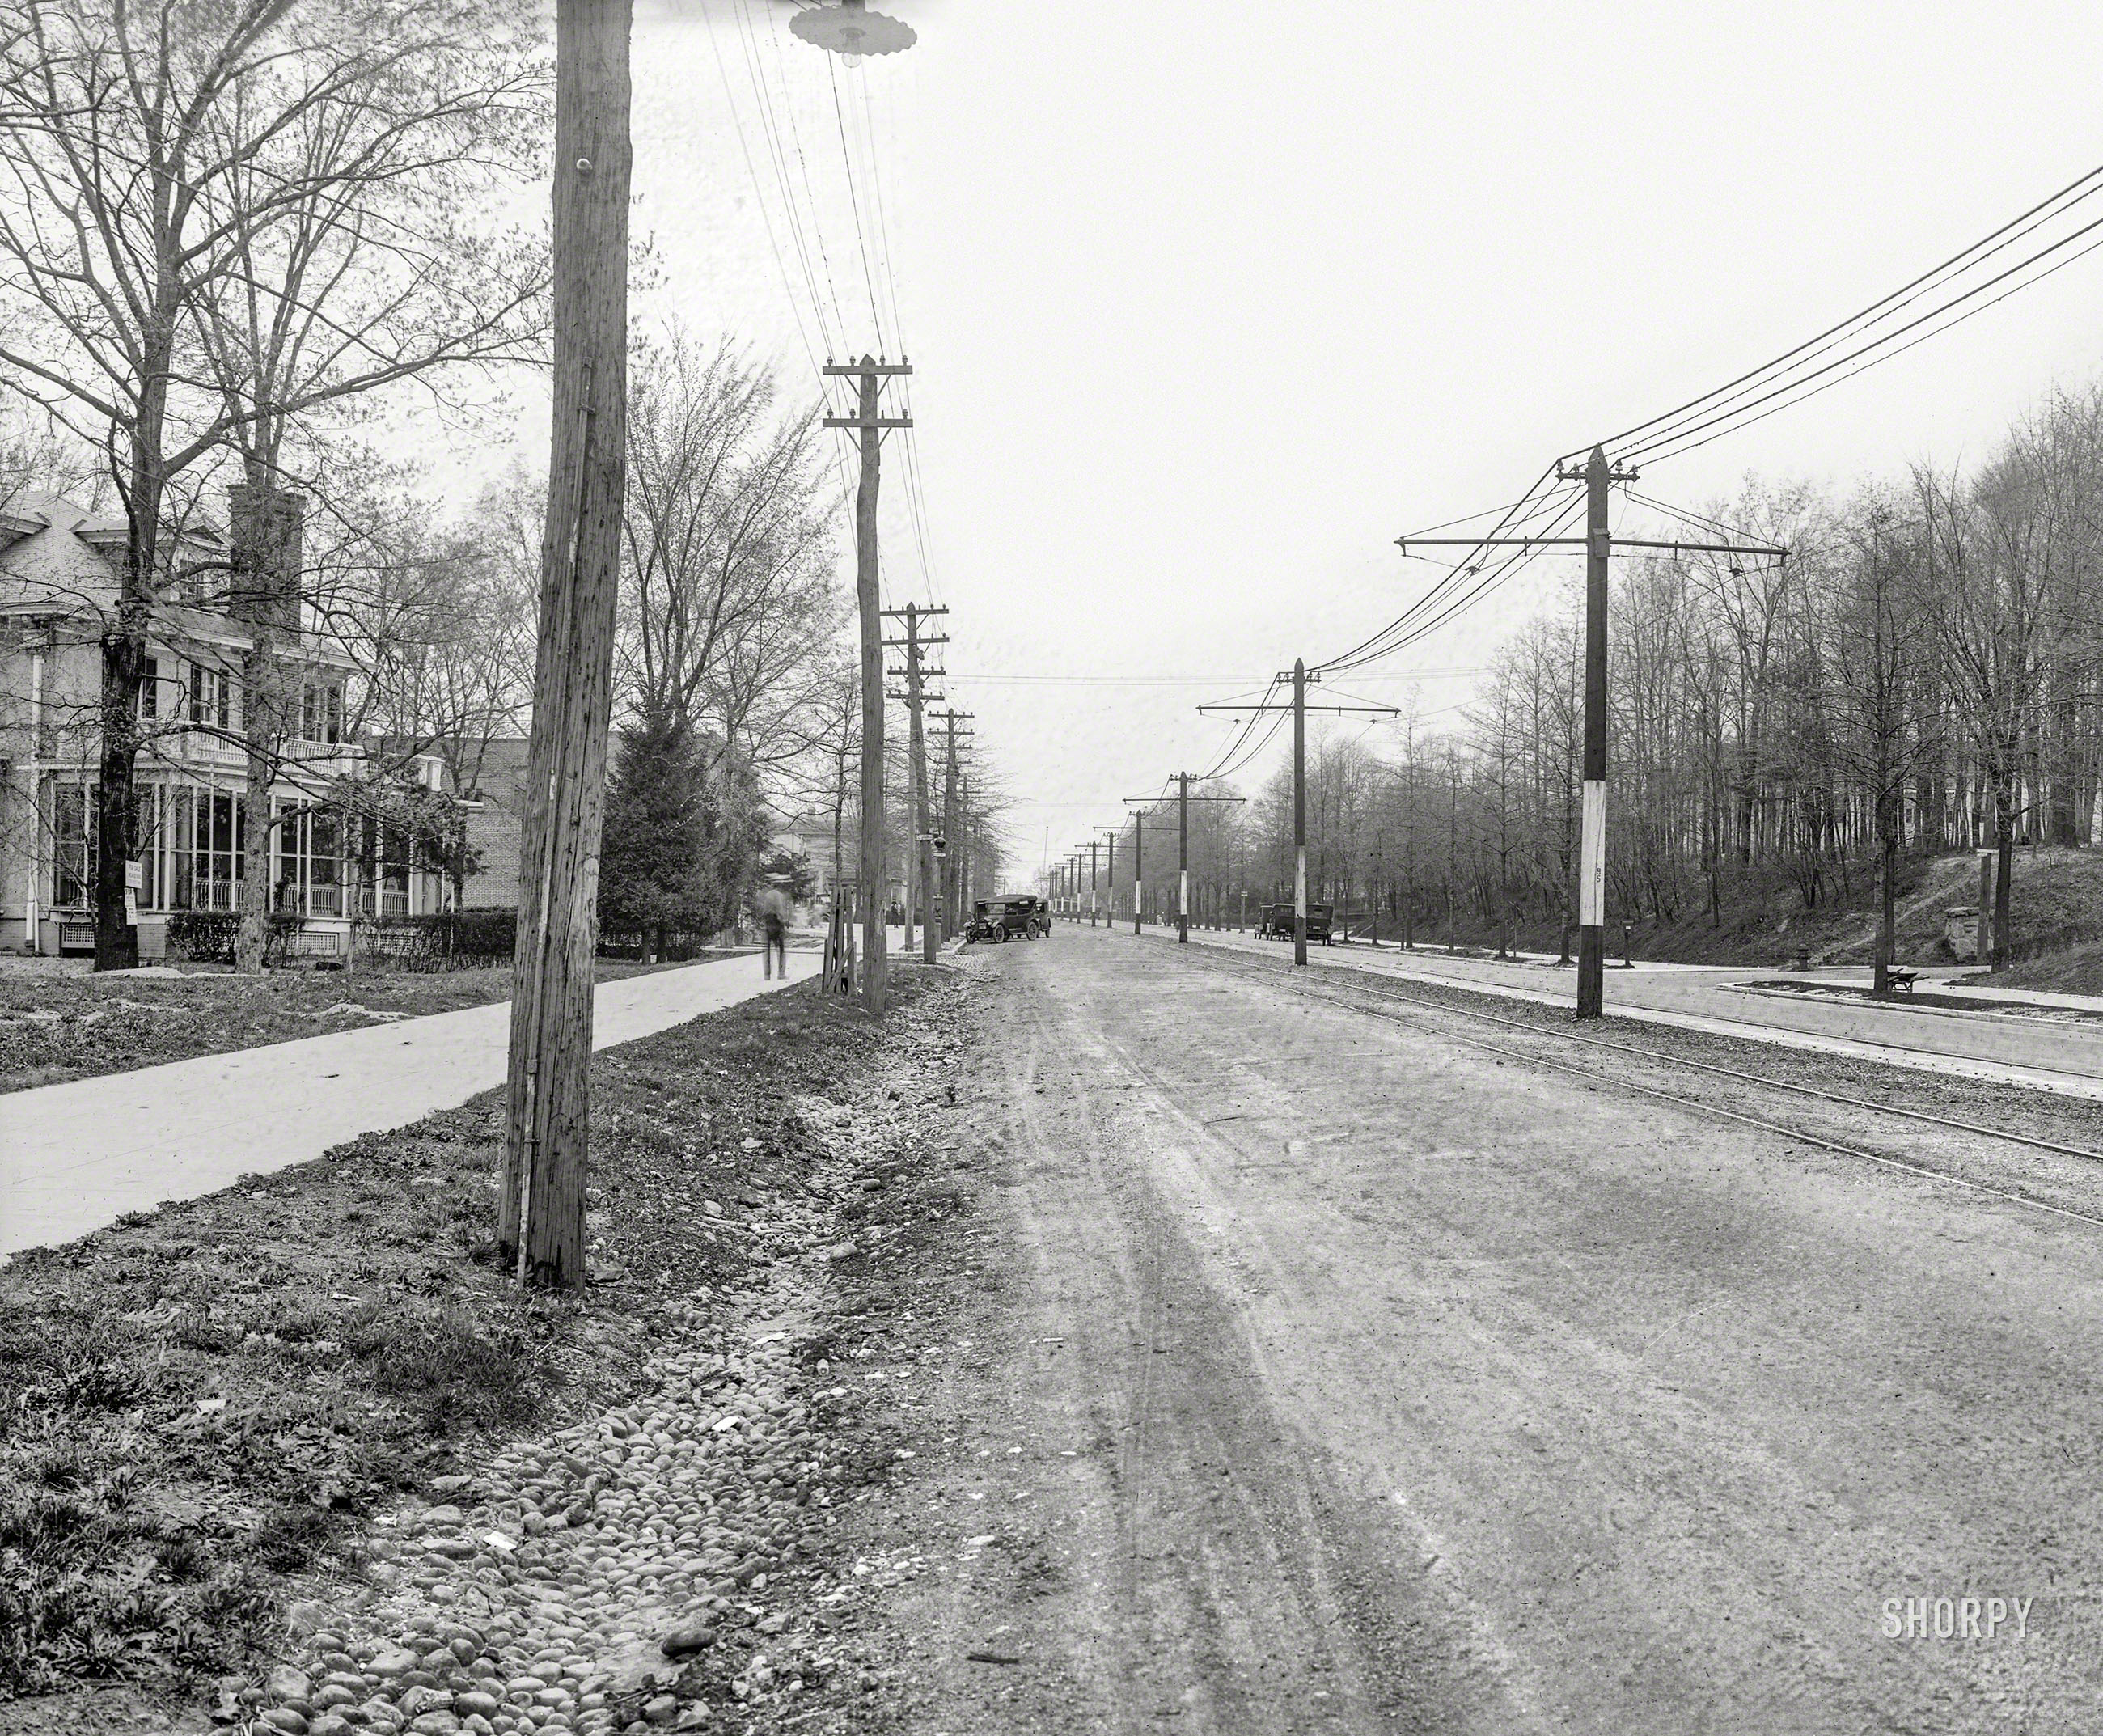 Washington, D.C., 1922. "Connecticut Avenue, north from Ingomar Street." 8x10 inch glass negative, National Photo Company Collection. View full size.